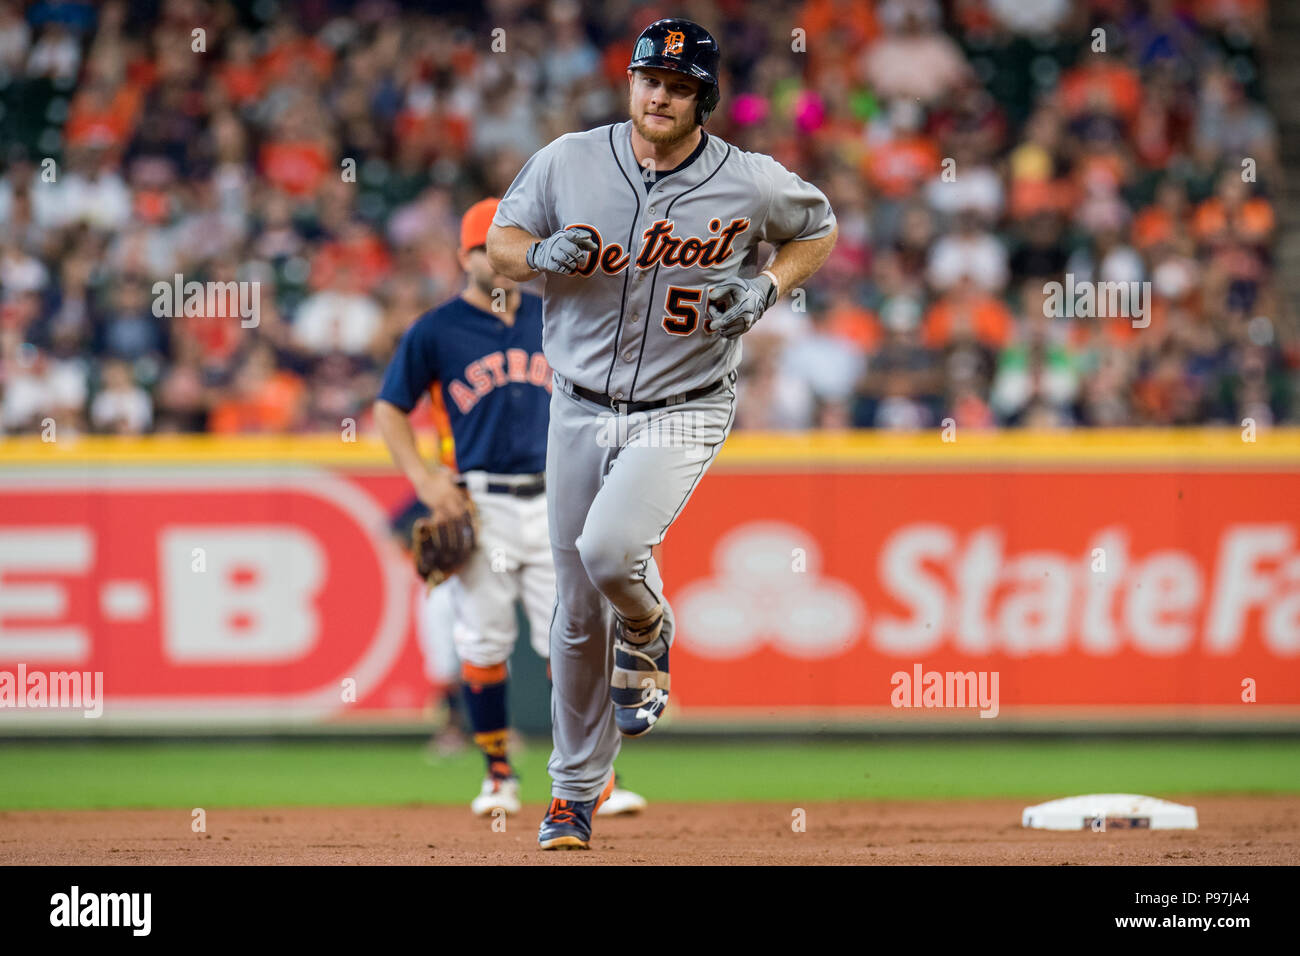 Houston, TX, USA. 15th July, 2018. Detroit Tigers catcher John Hicks (55) rounds the bases after hitting a two-run home run during a Major League Baseball game between the Houston Astros and the Detroit Tigers at Minute Maid Park in Houston, TX. The Tigers won the game 6 to 3.Trask Smith/CSM/Alamy Live News Stock Photo